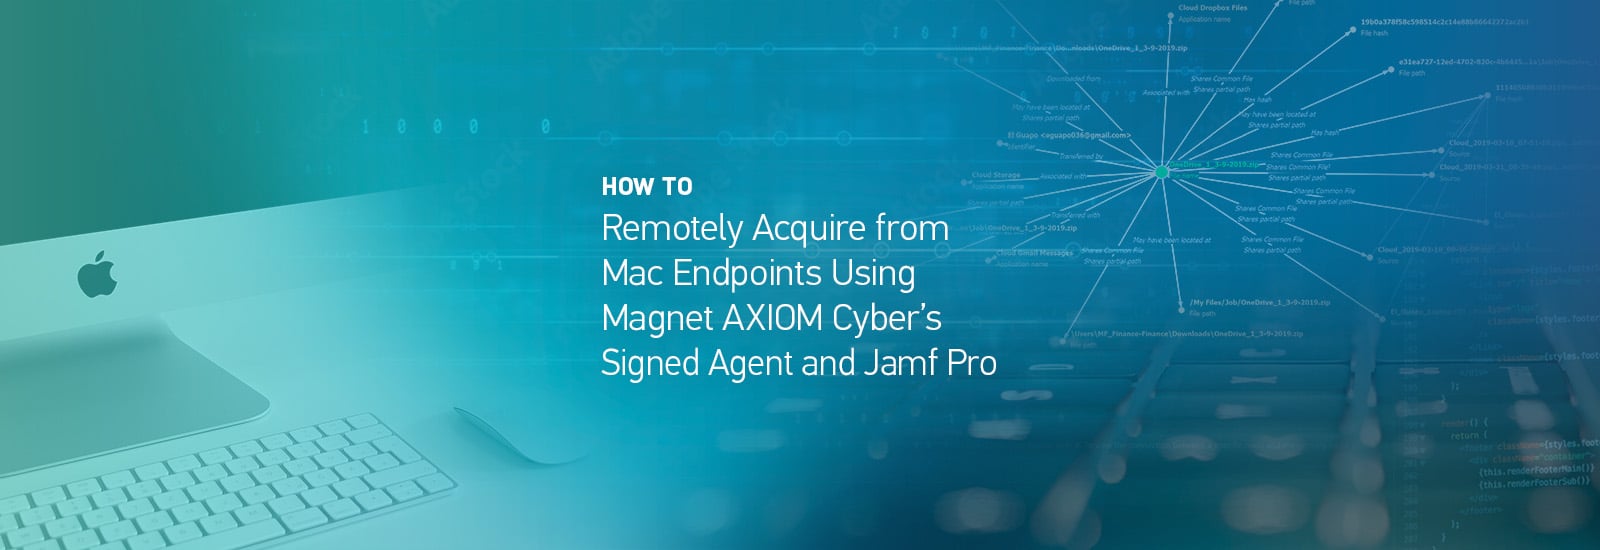 A decorative header for the post How to Remotely Acquire from Mac Endpoints Using AXIOM Cyber’s Signed Agent and Jamf Pro